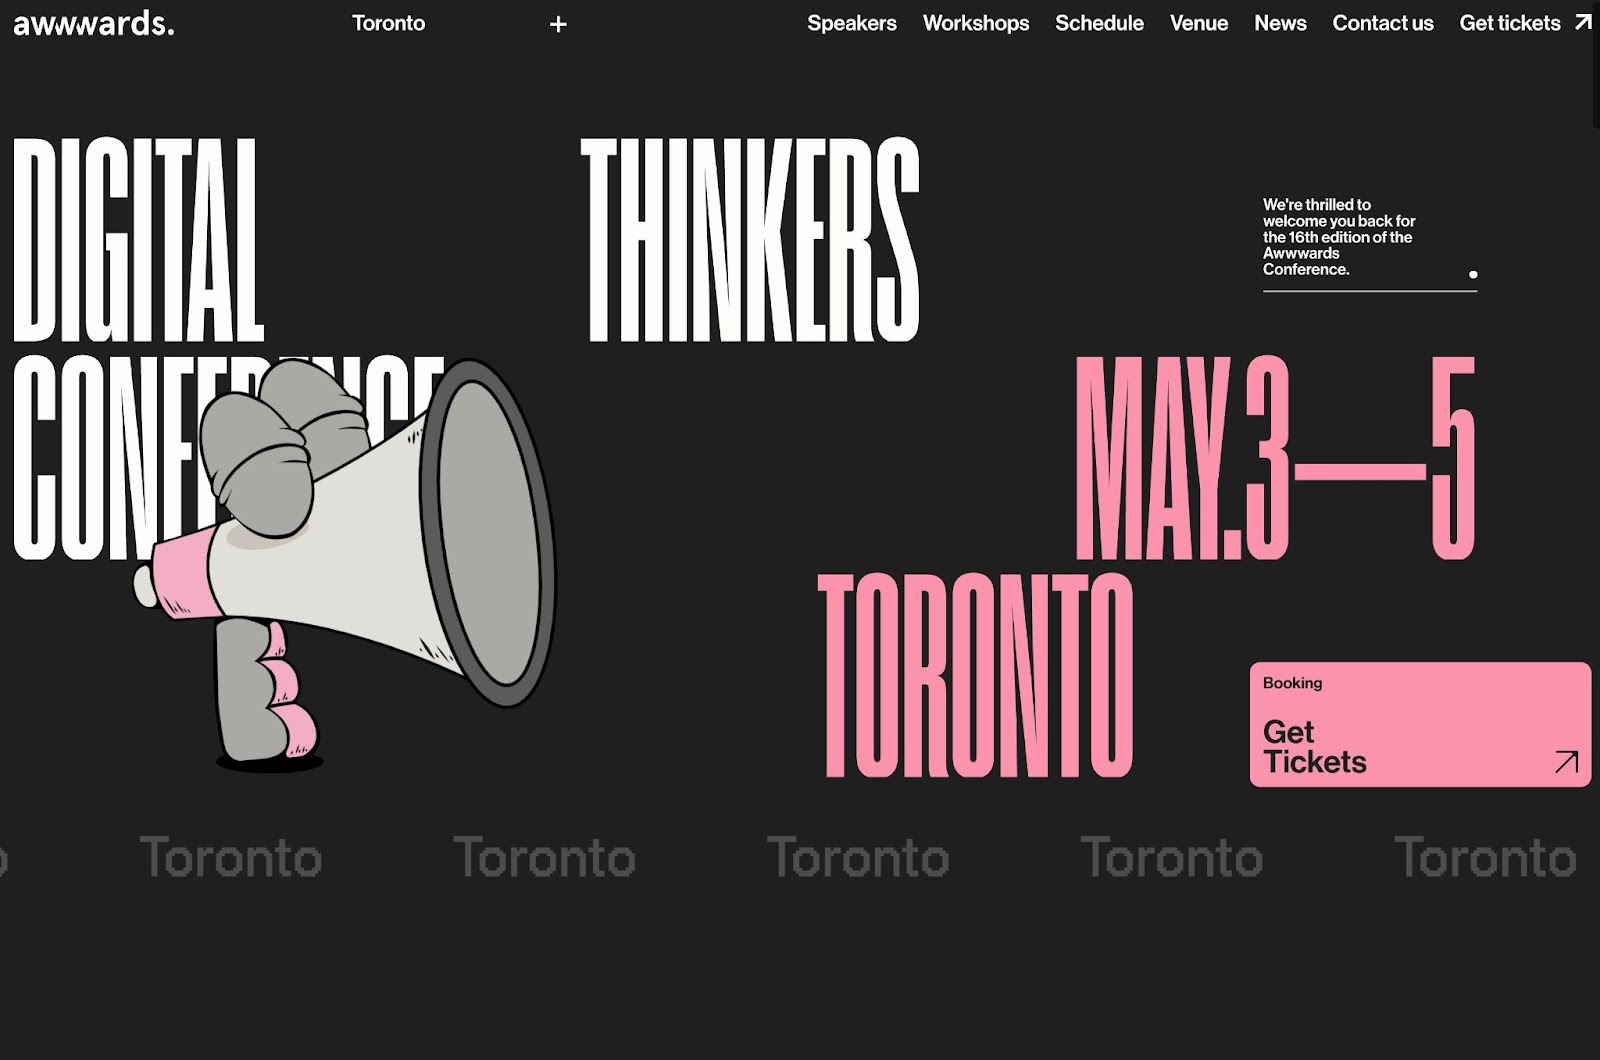 website color themes, The Awwwards Conference